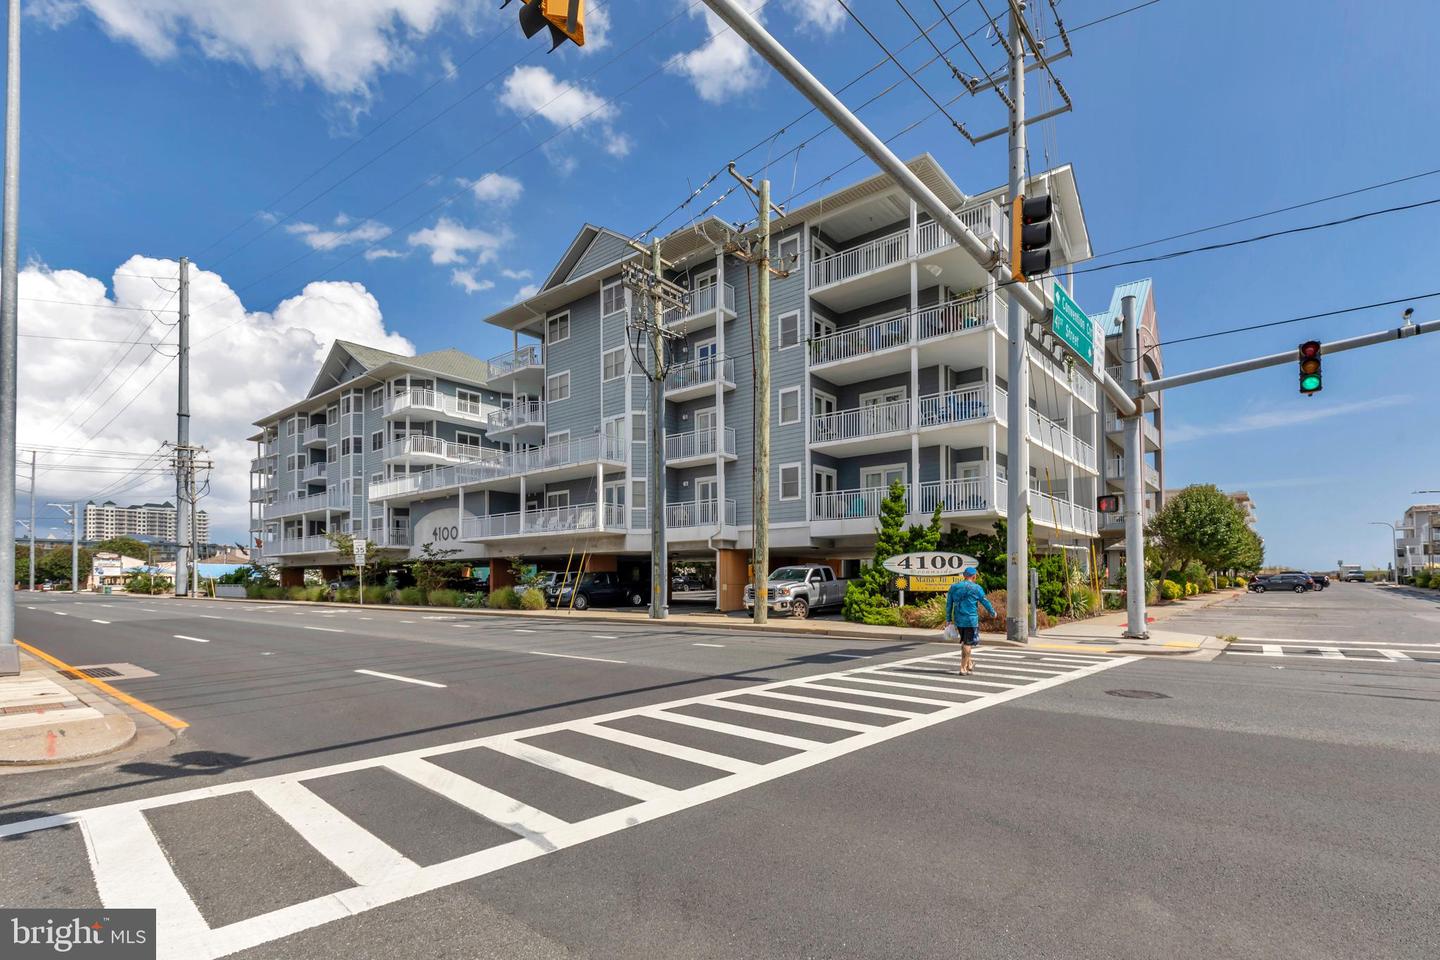 MDWO2015722-802606211802-2024-02-22-09-49-26 18 41st St #302 | Ocean City, MD Real Estate For Sale | MLS# Mdwo2015722  - 1st Choice Properties